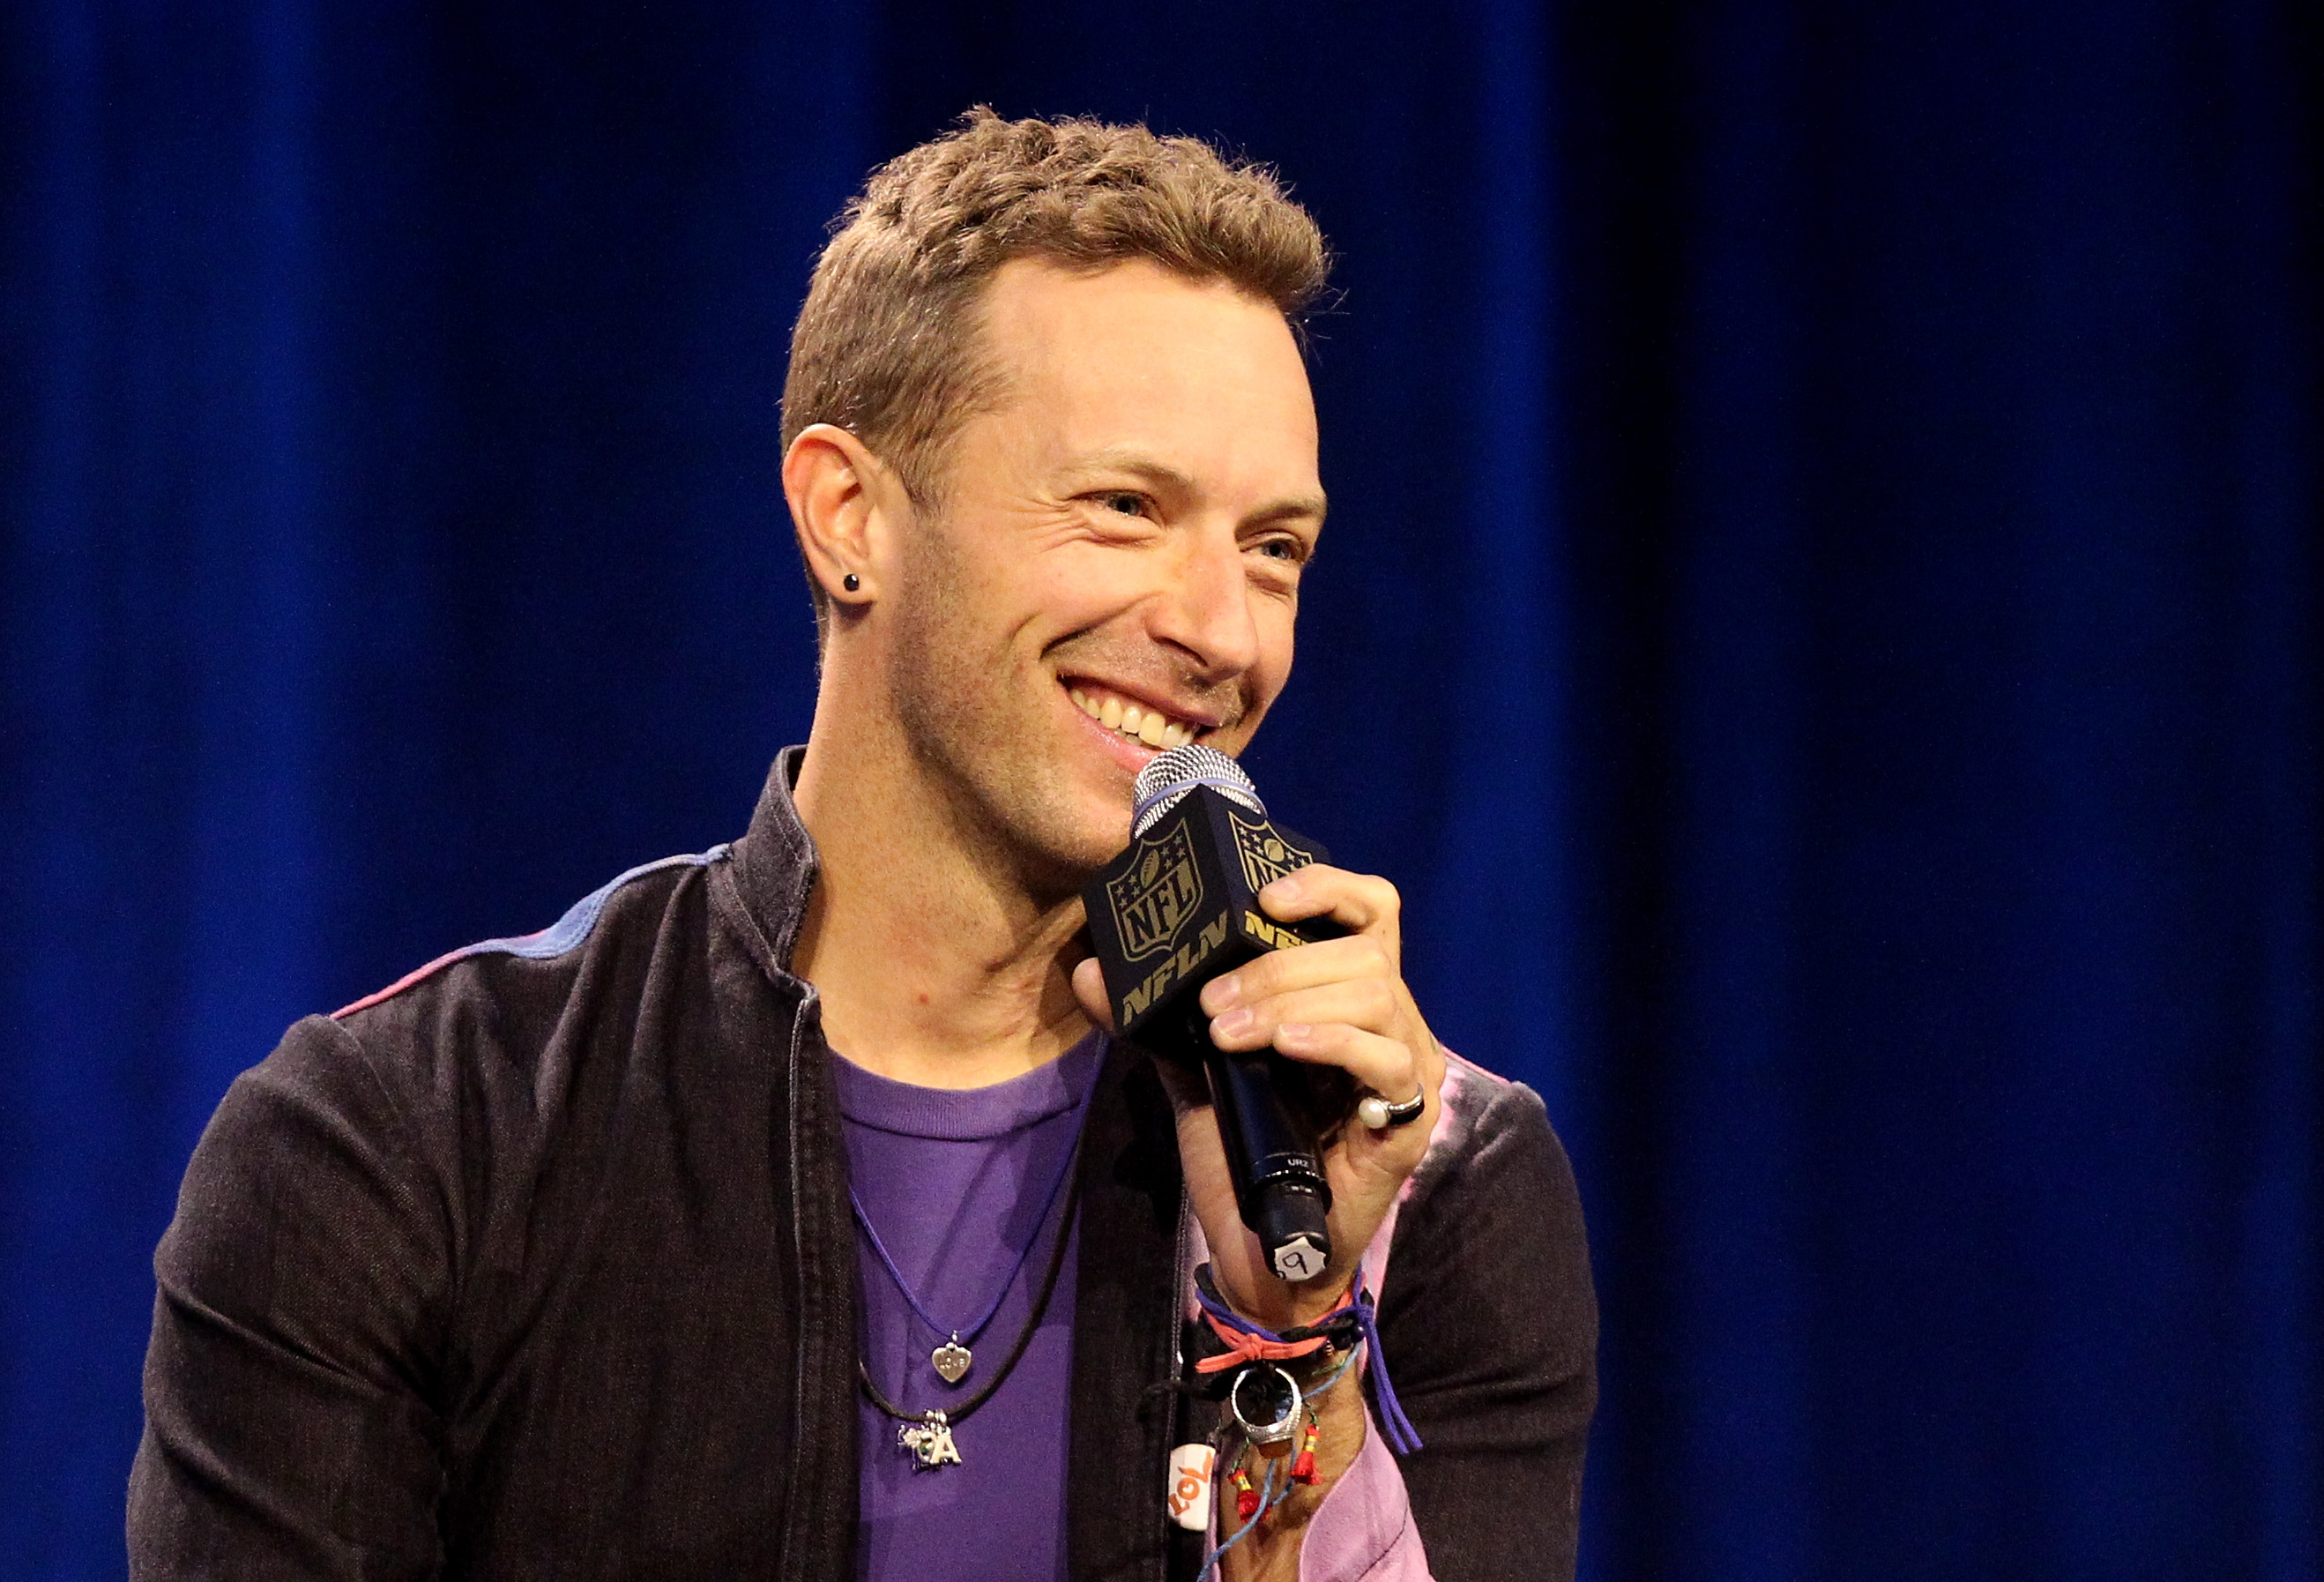 Chris Martin of Coldplay with a microphone